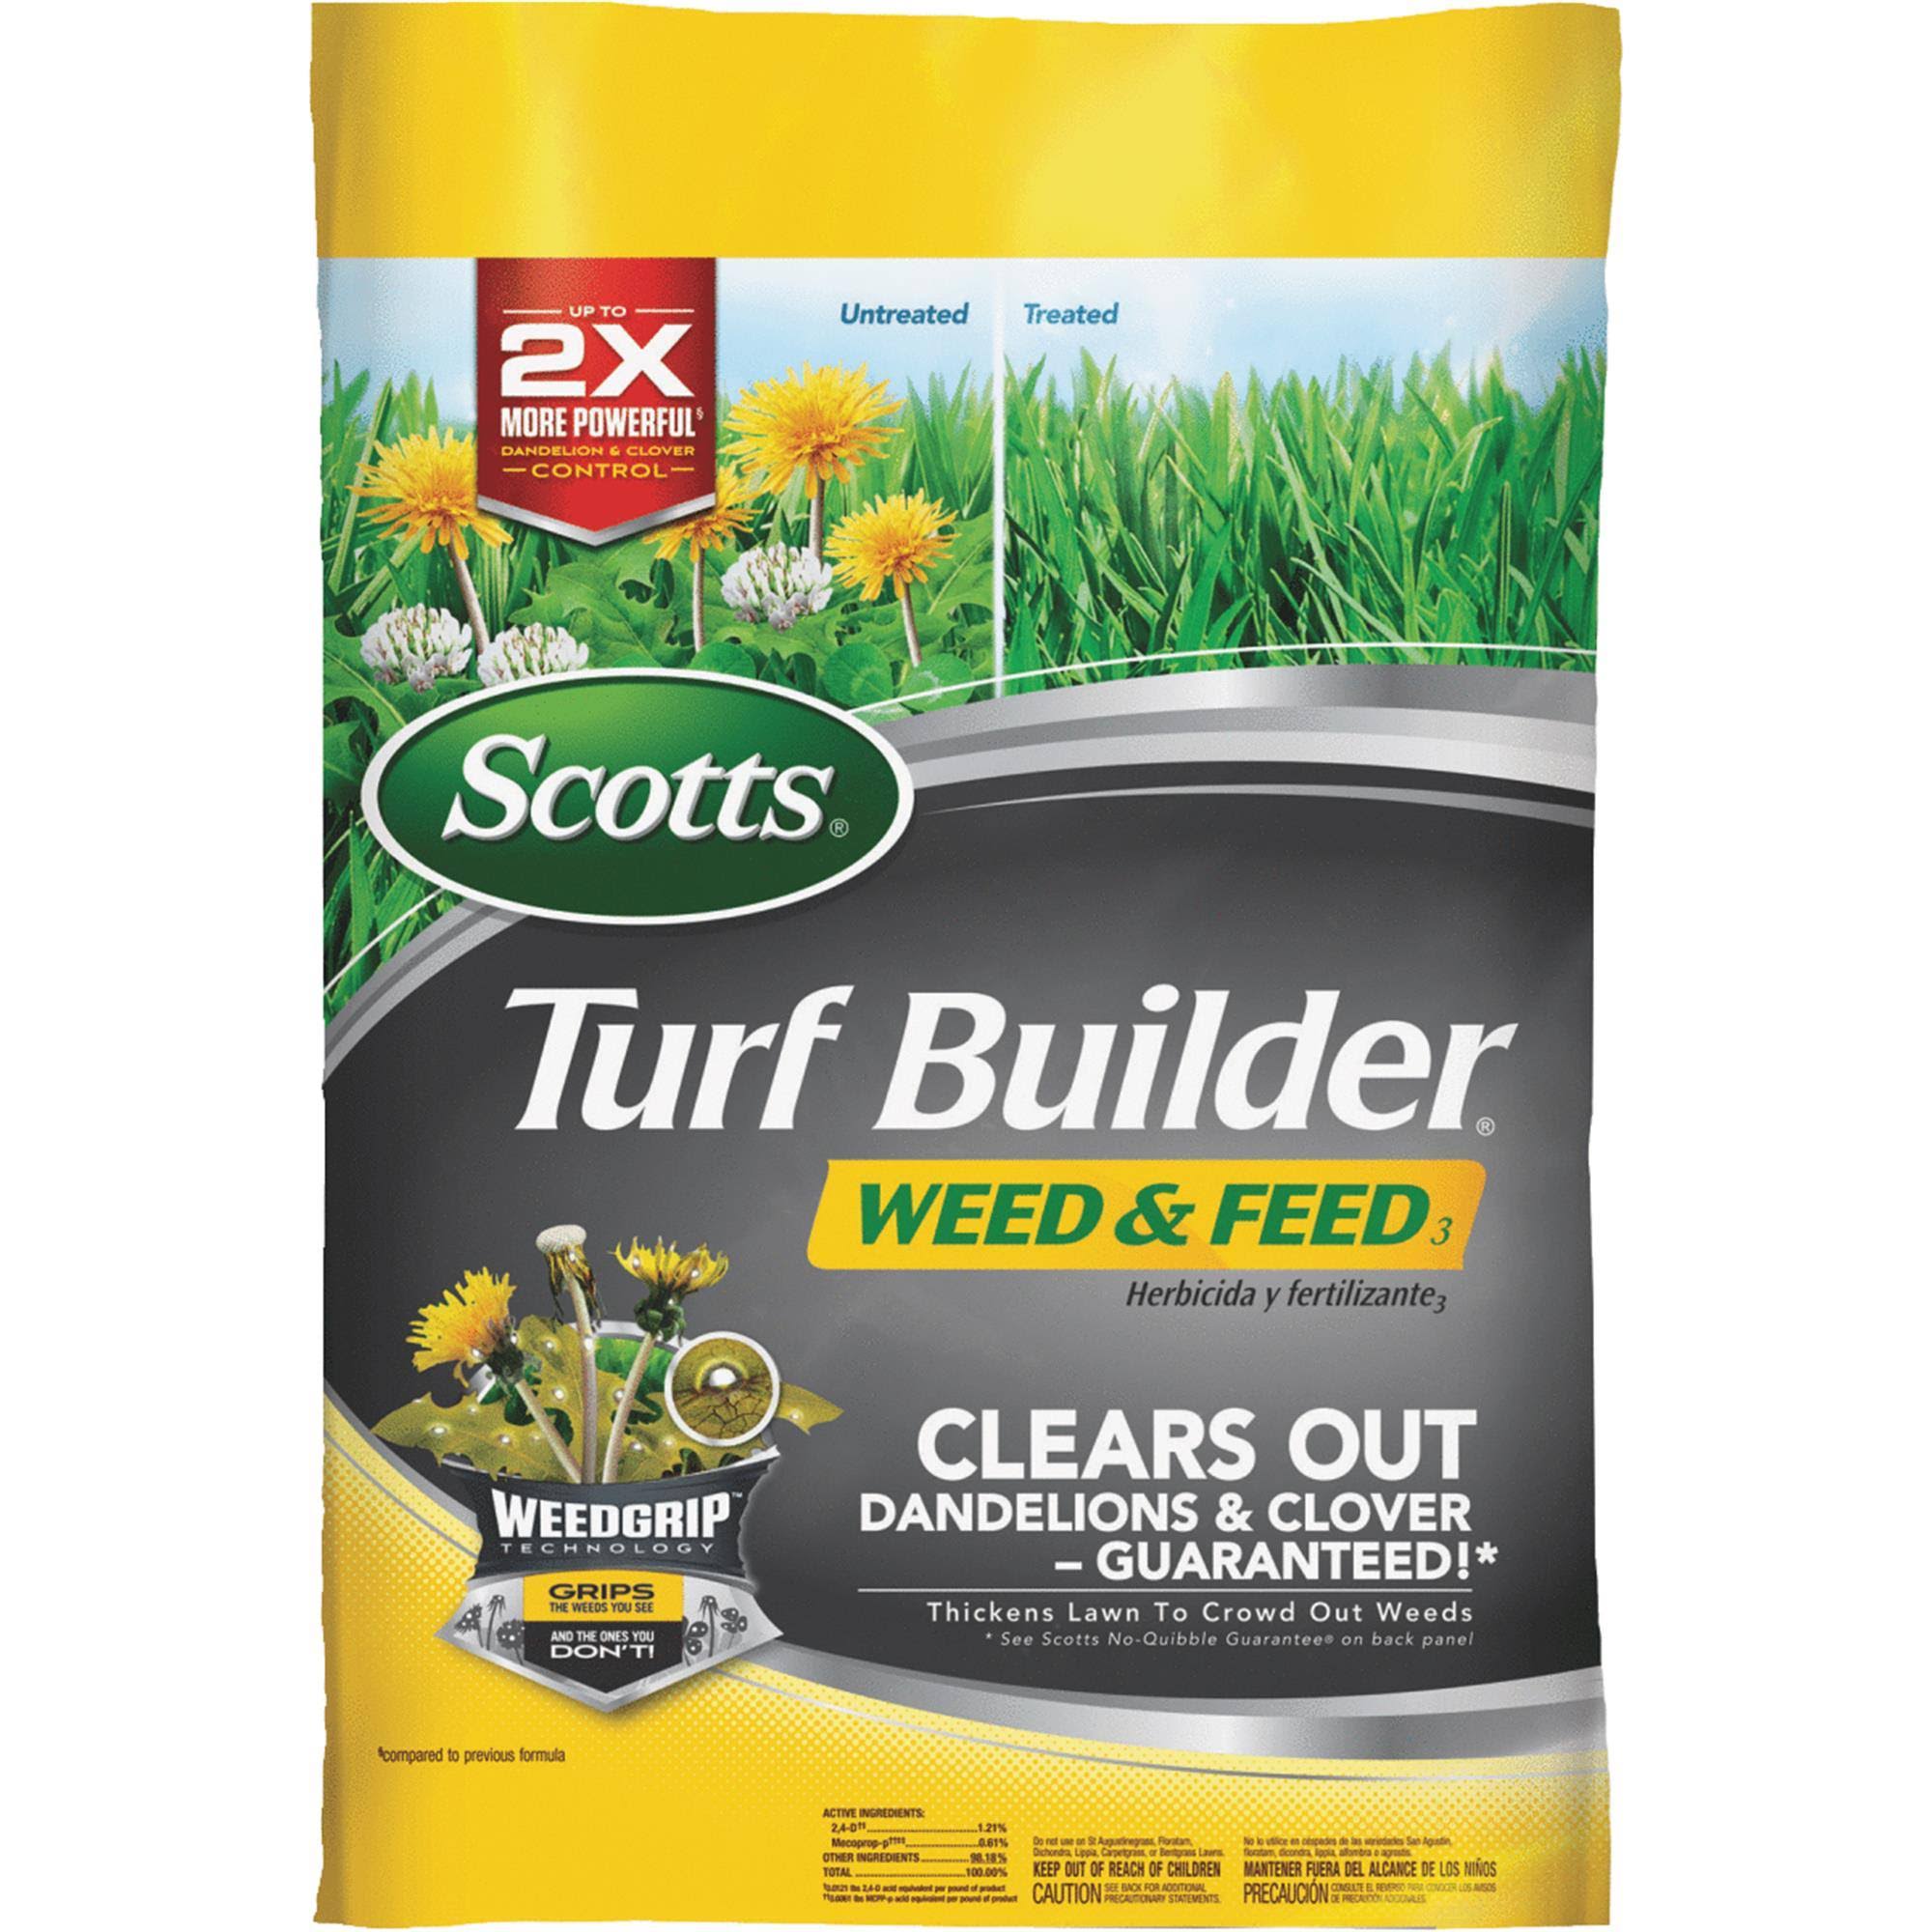 Scotts Turf Builder Weed and Feed Lawn Fertilizer - 43lb